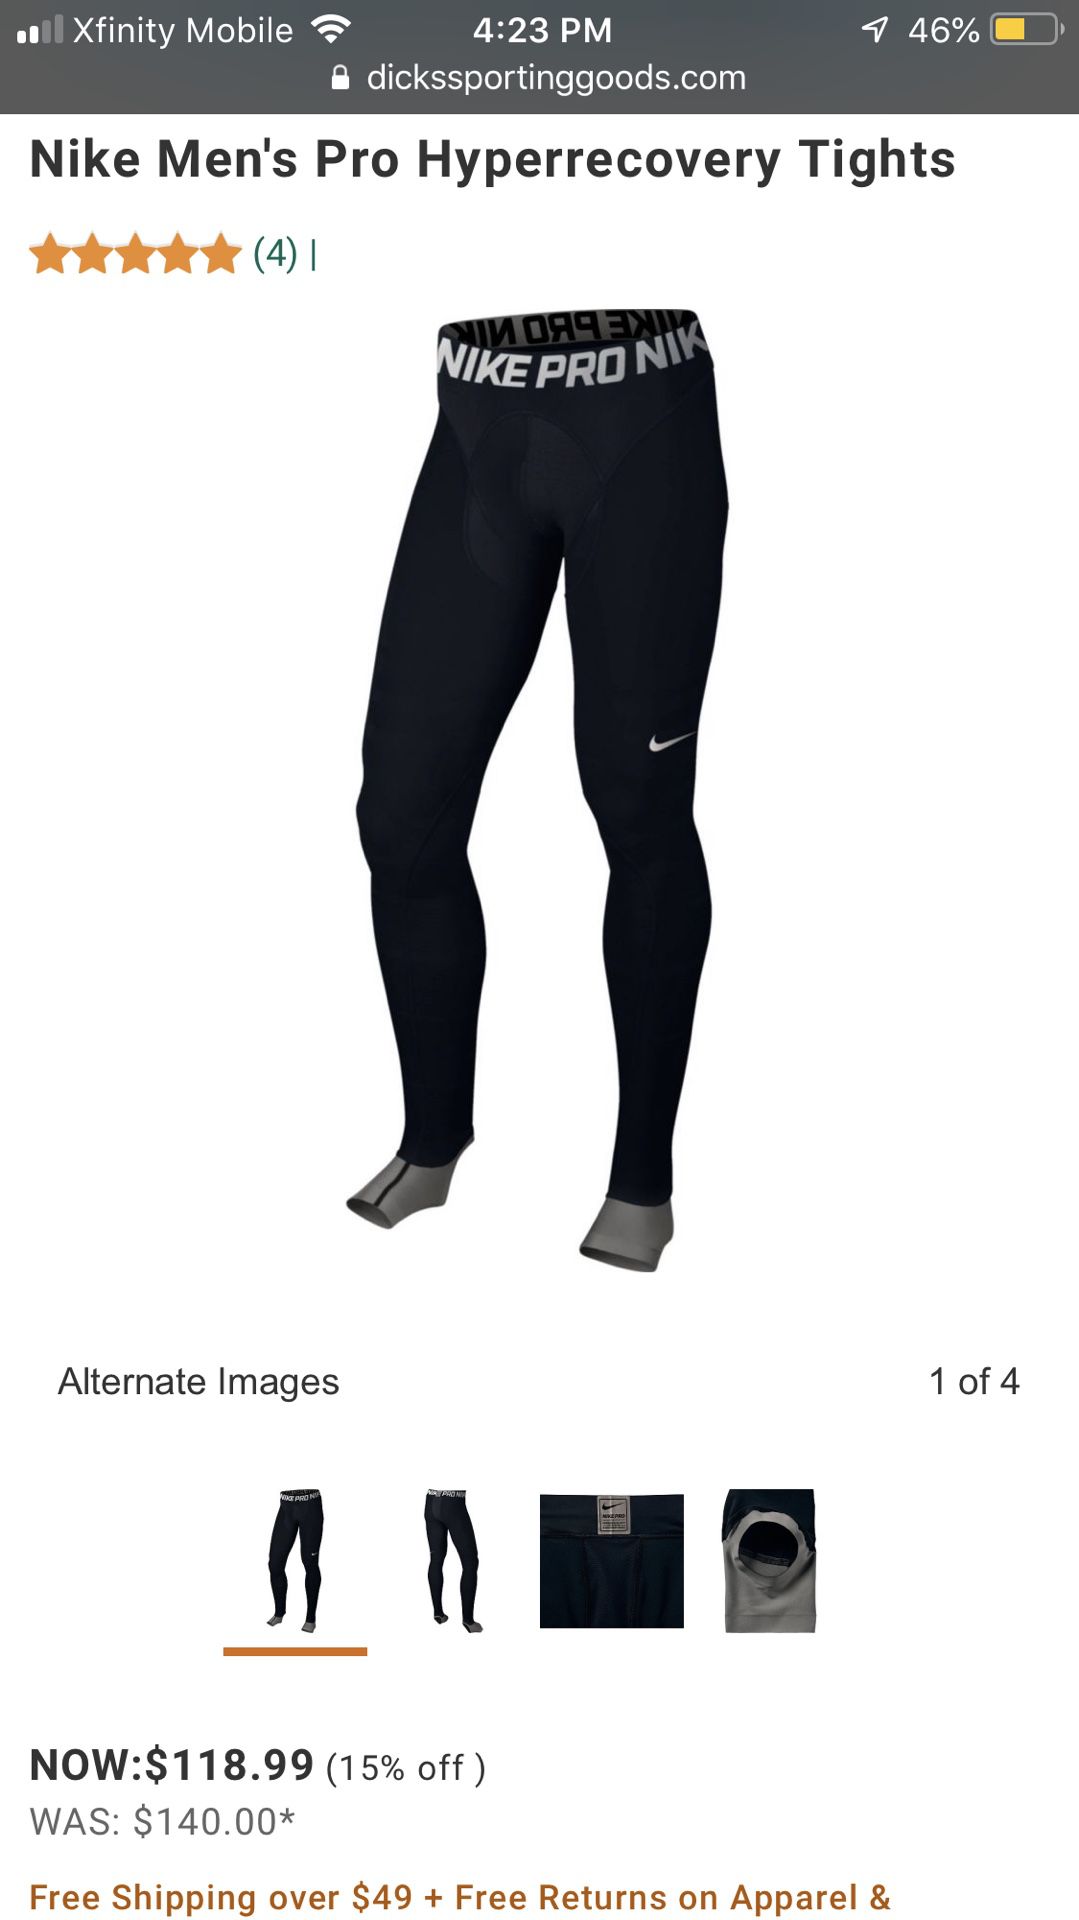 NIKE HYPERRECOVERY COMPRESSION PANTS